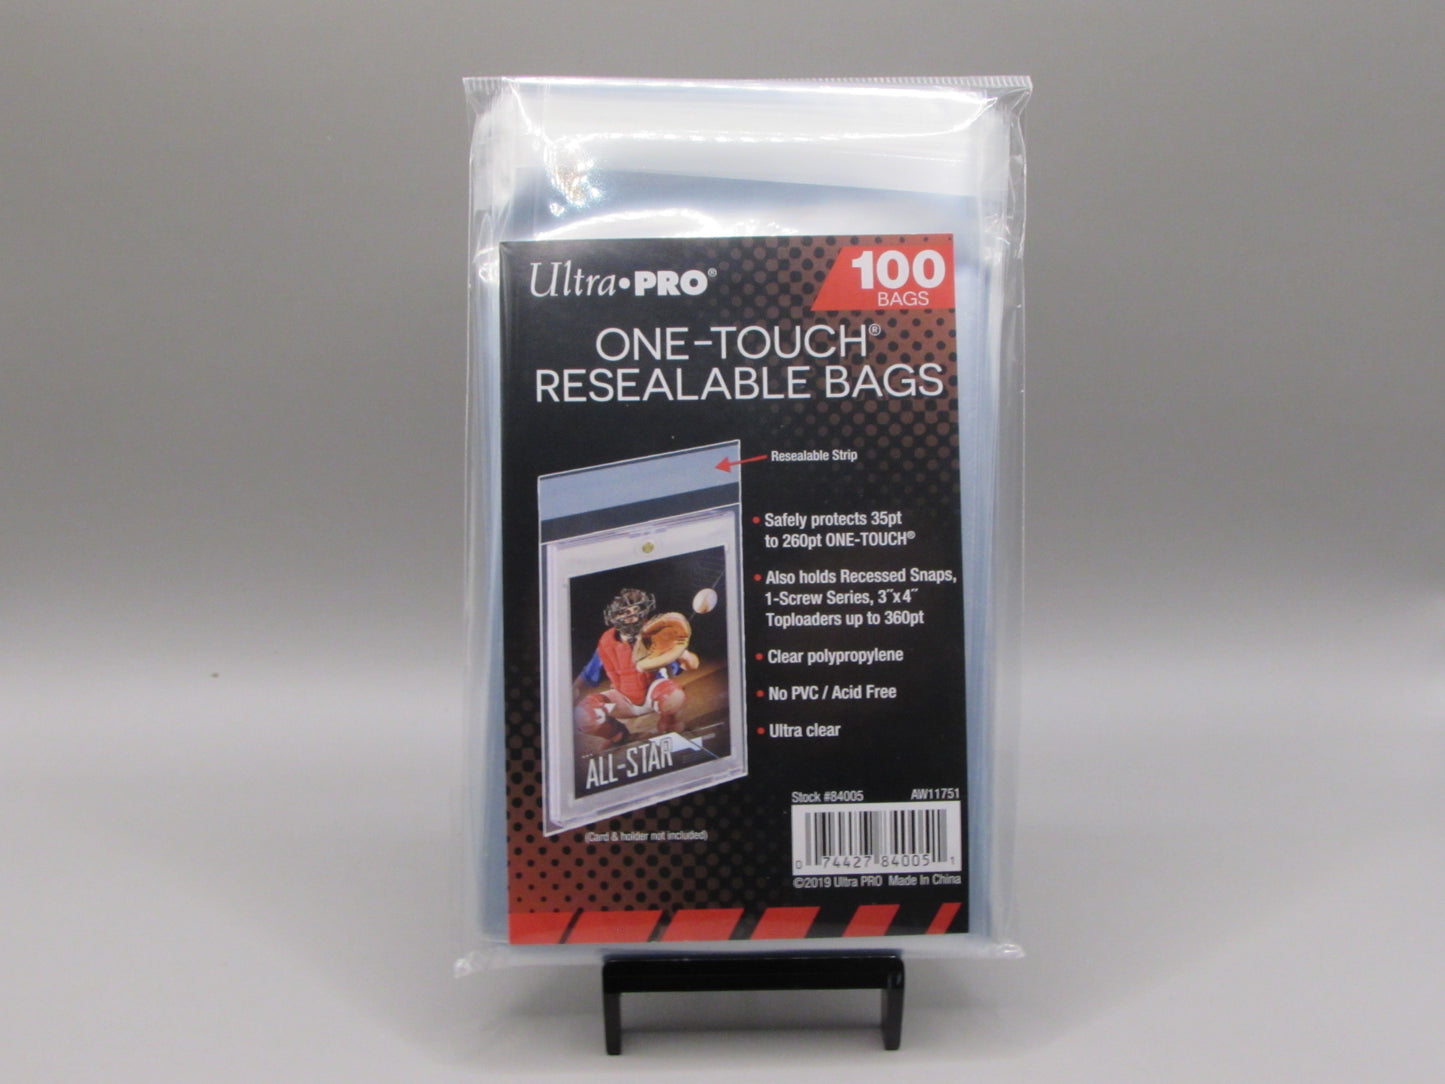 Ultra pro one-touch resealable bags